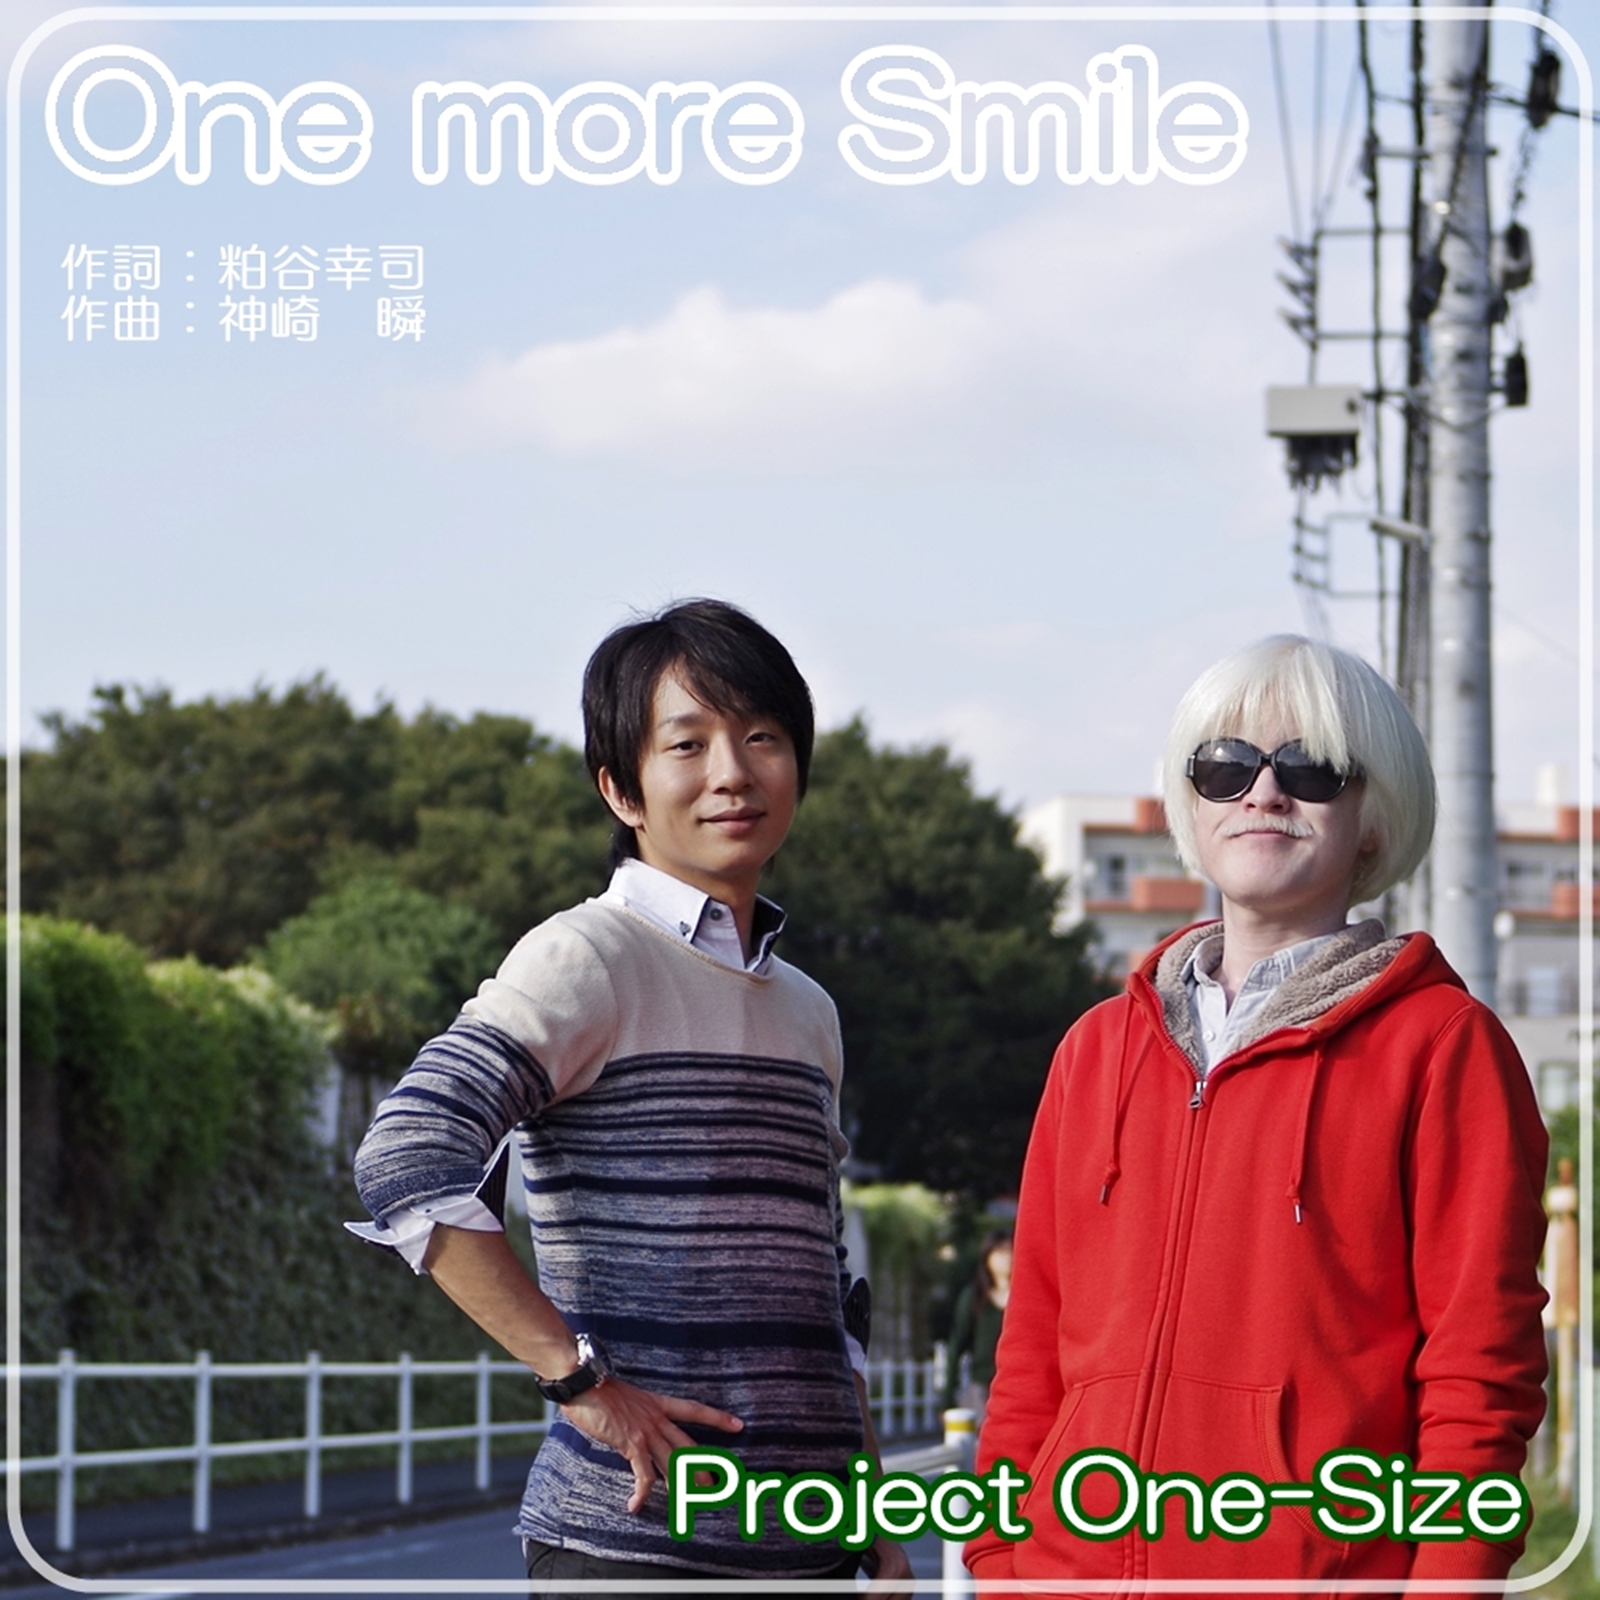 『One more Smile』アートワーク